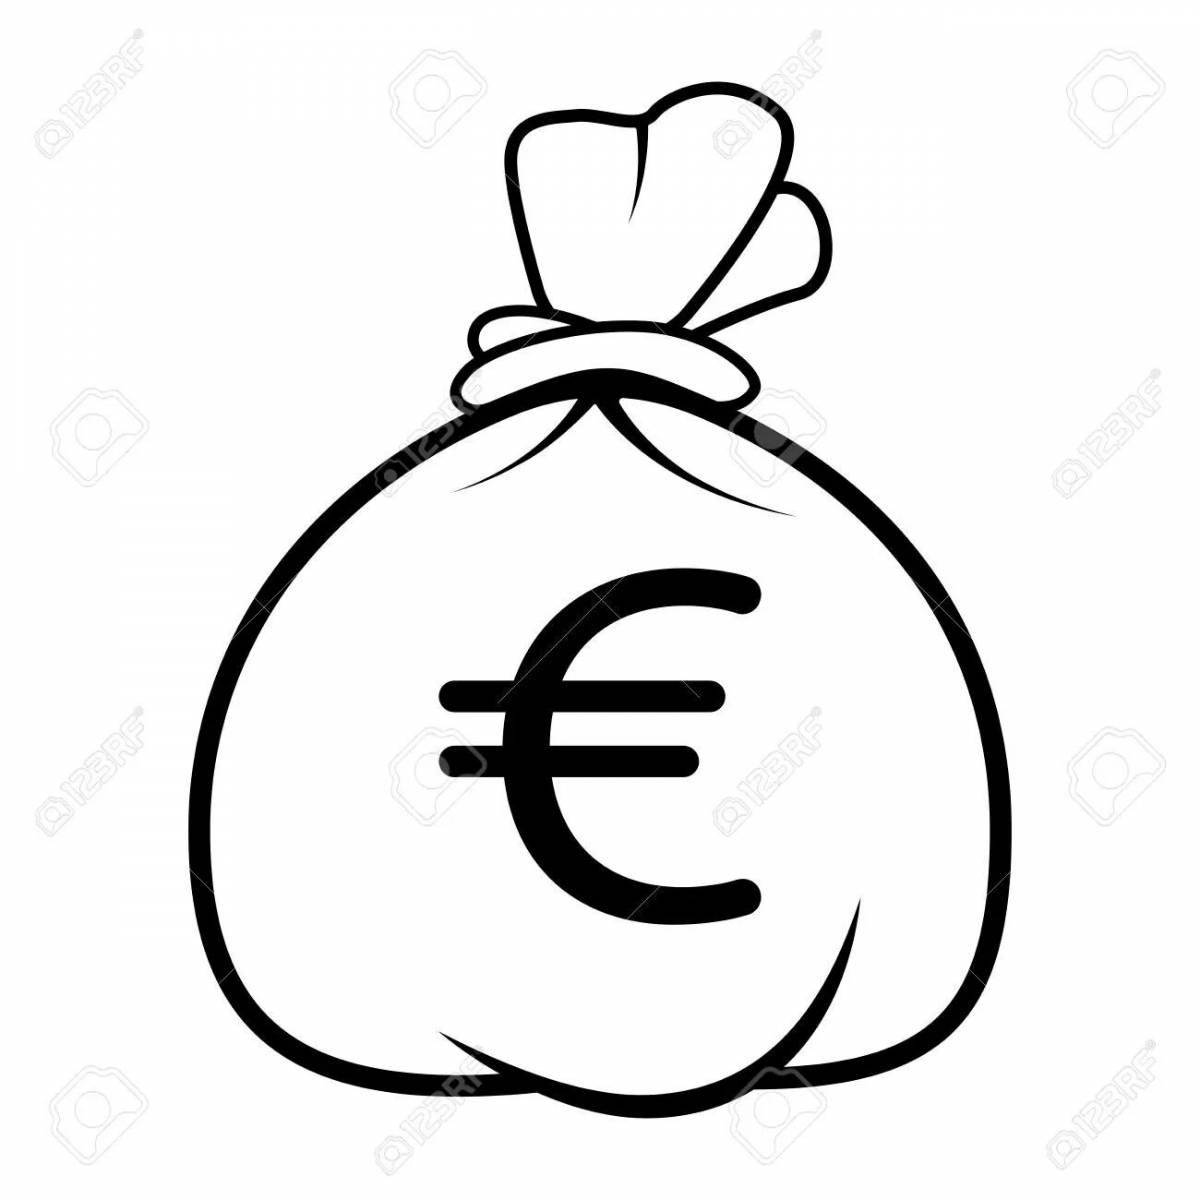 Animated money bag coloring page